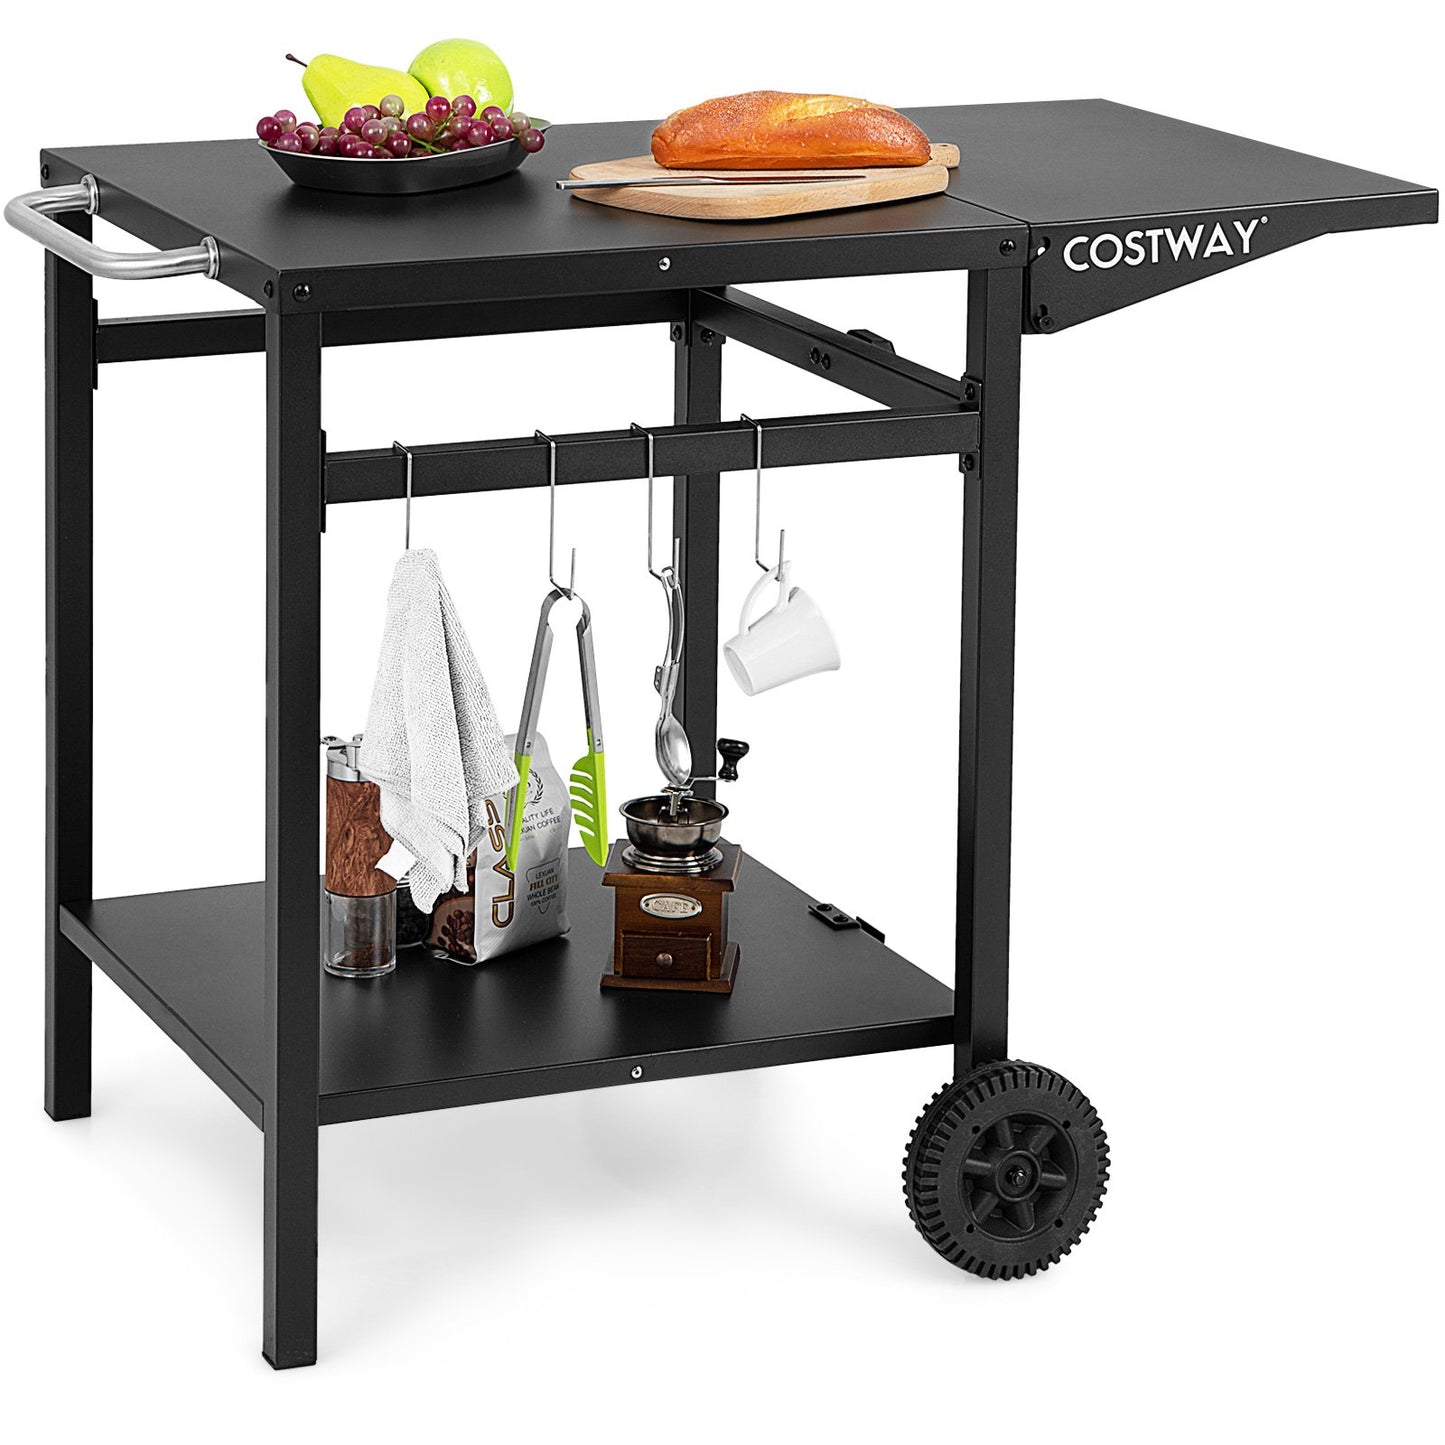 Movable Outdoor Grill Cart with Folding Tabletop and Hooks, Black